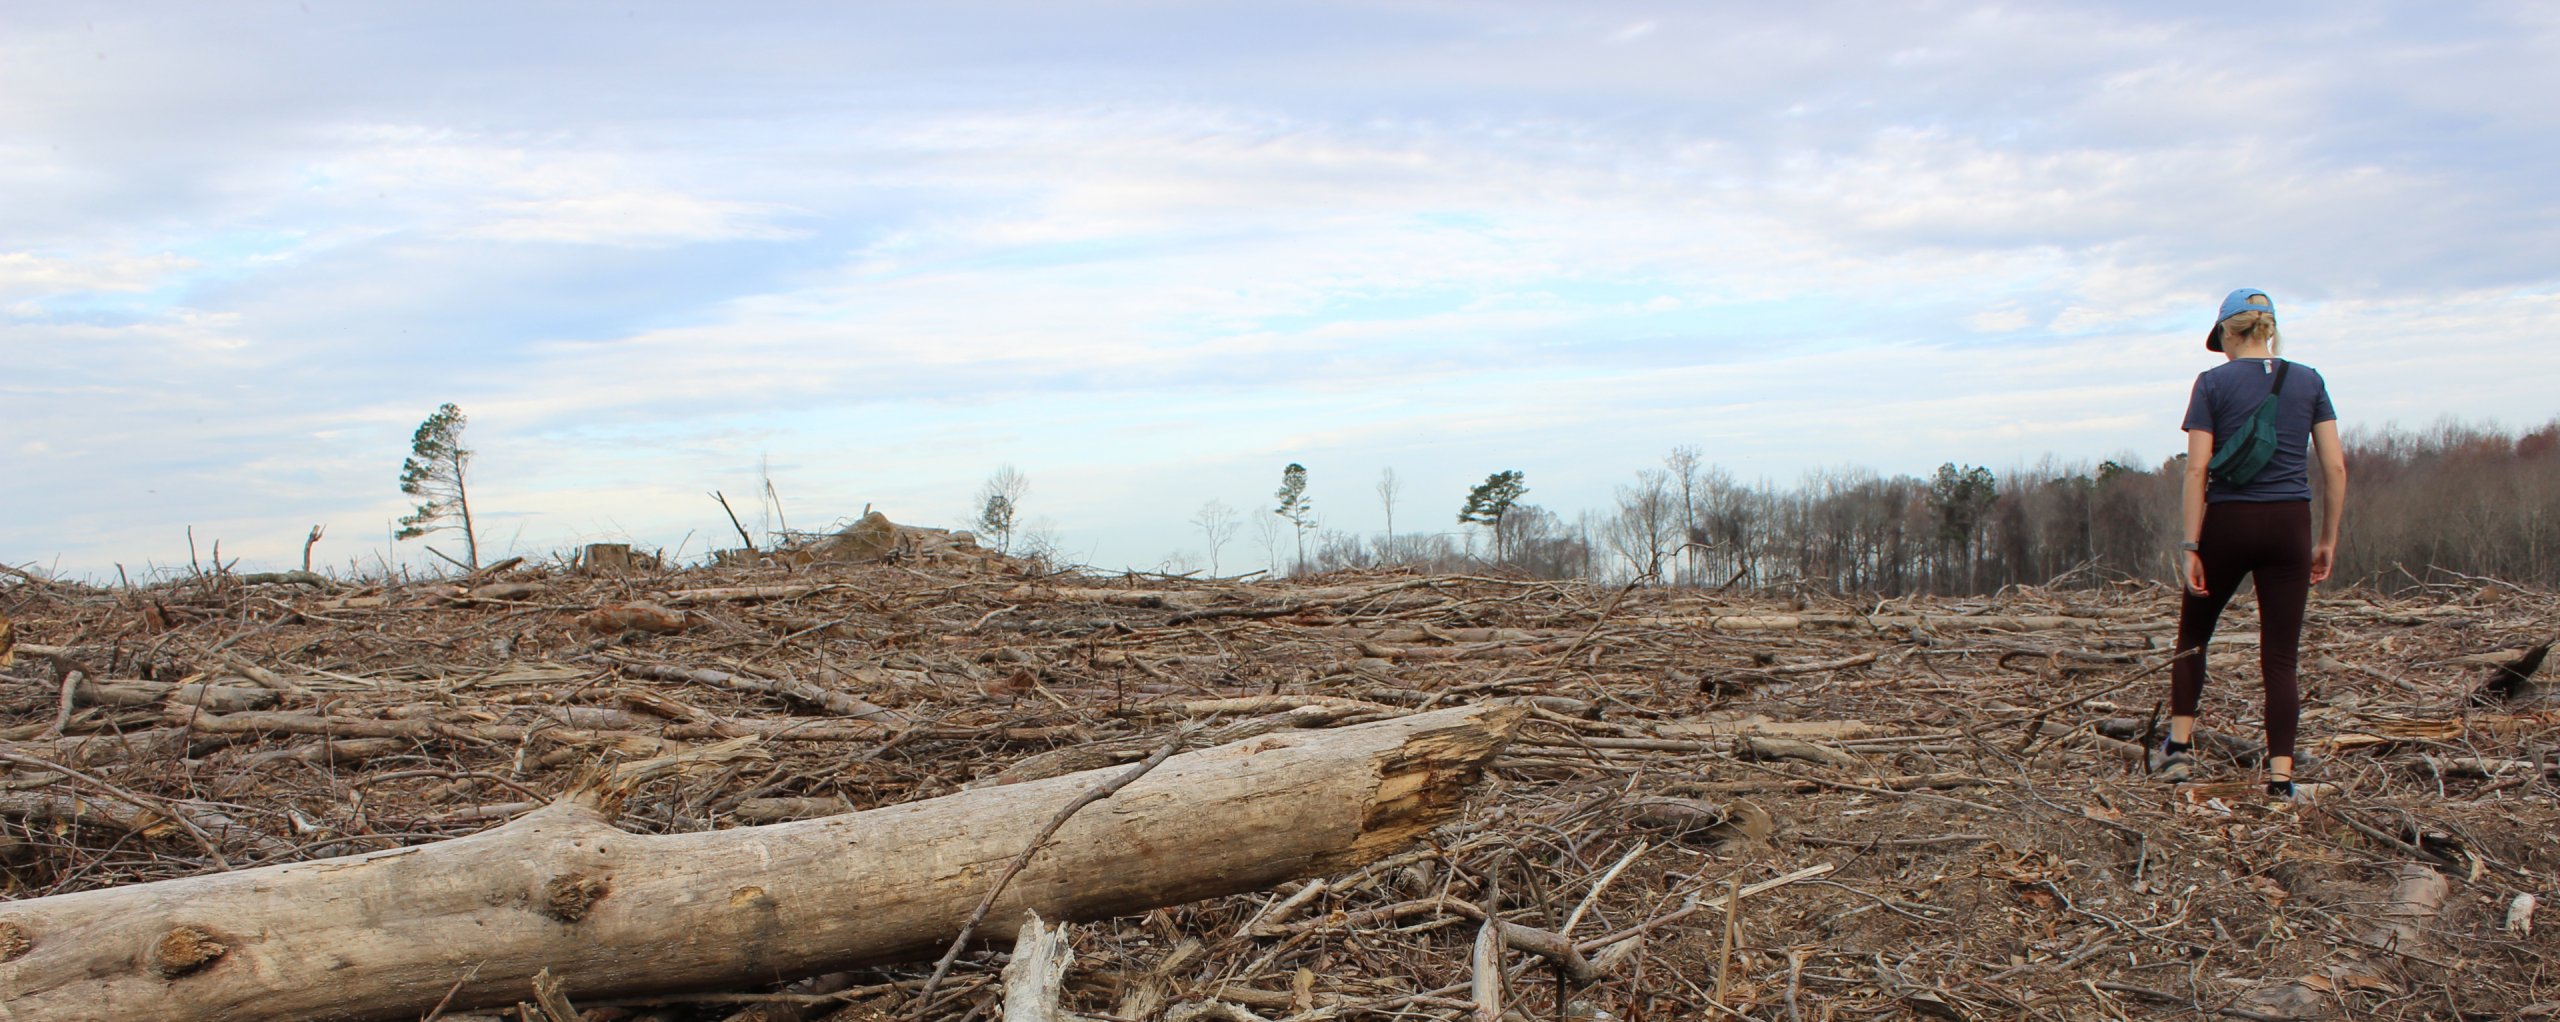 clearcutting-biomass-drax-forests-burning